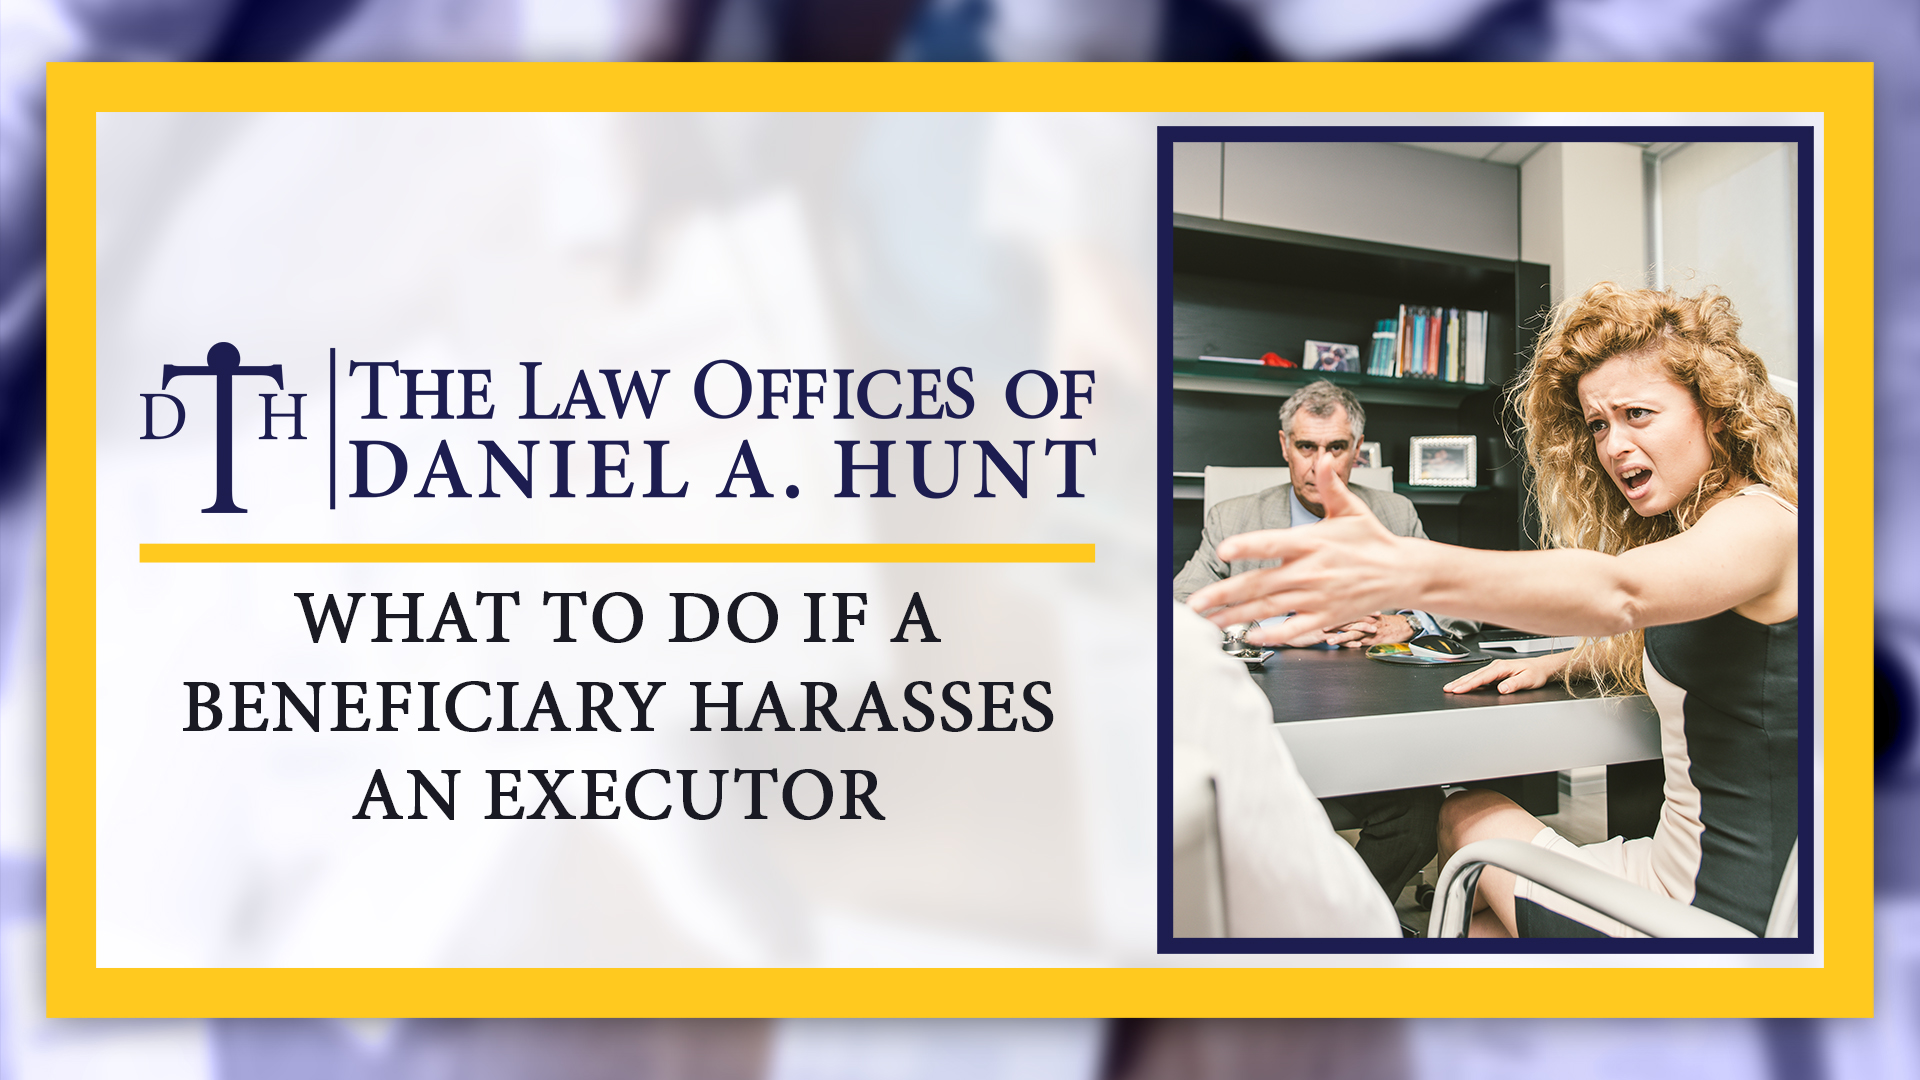 What To Do If A Beneficiary Harasses an Executor